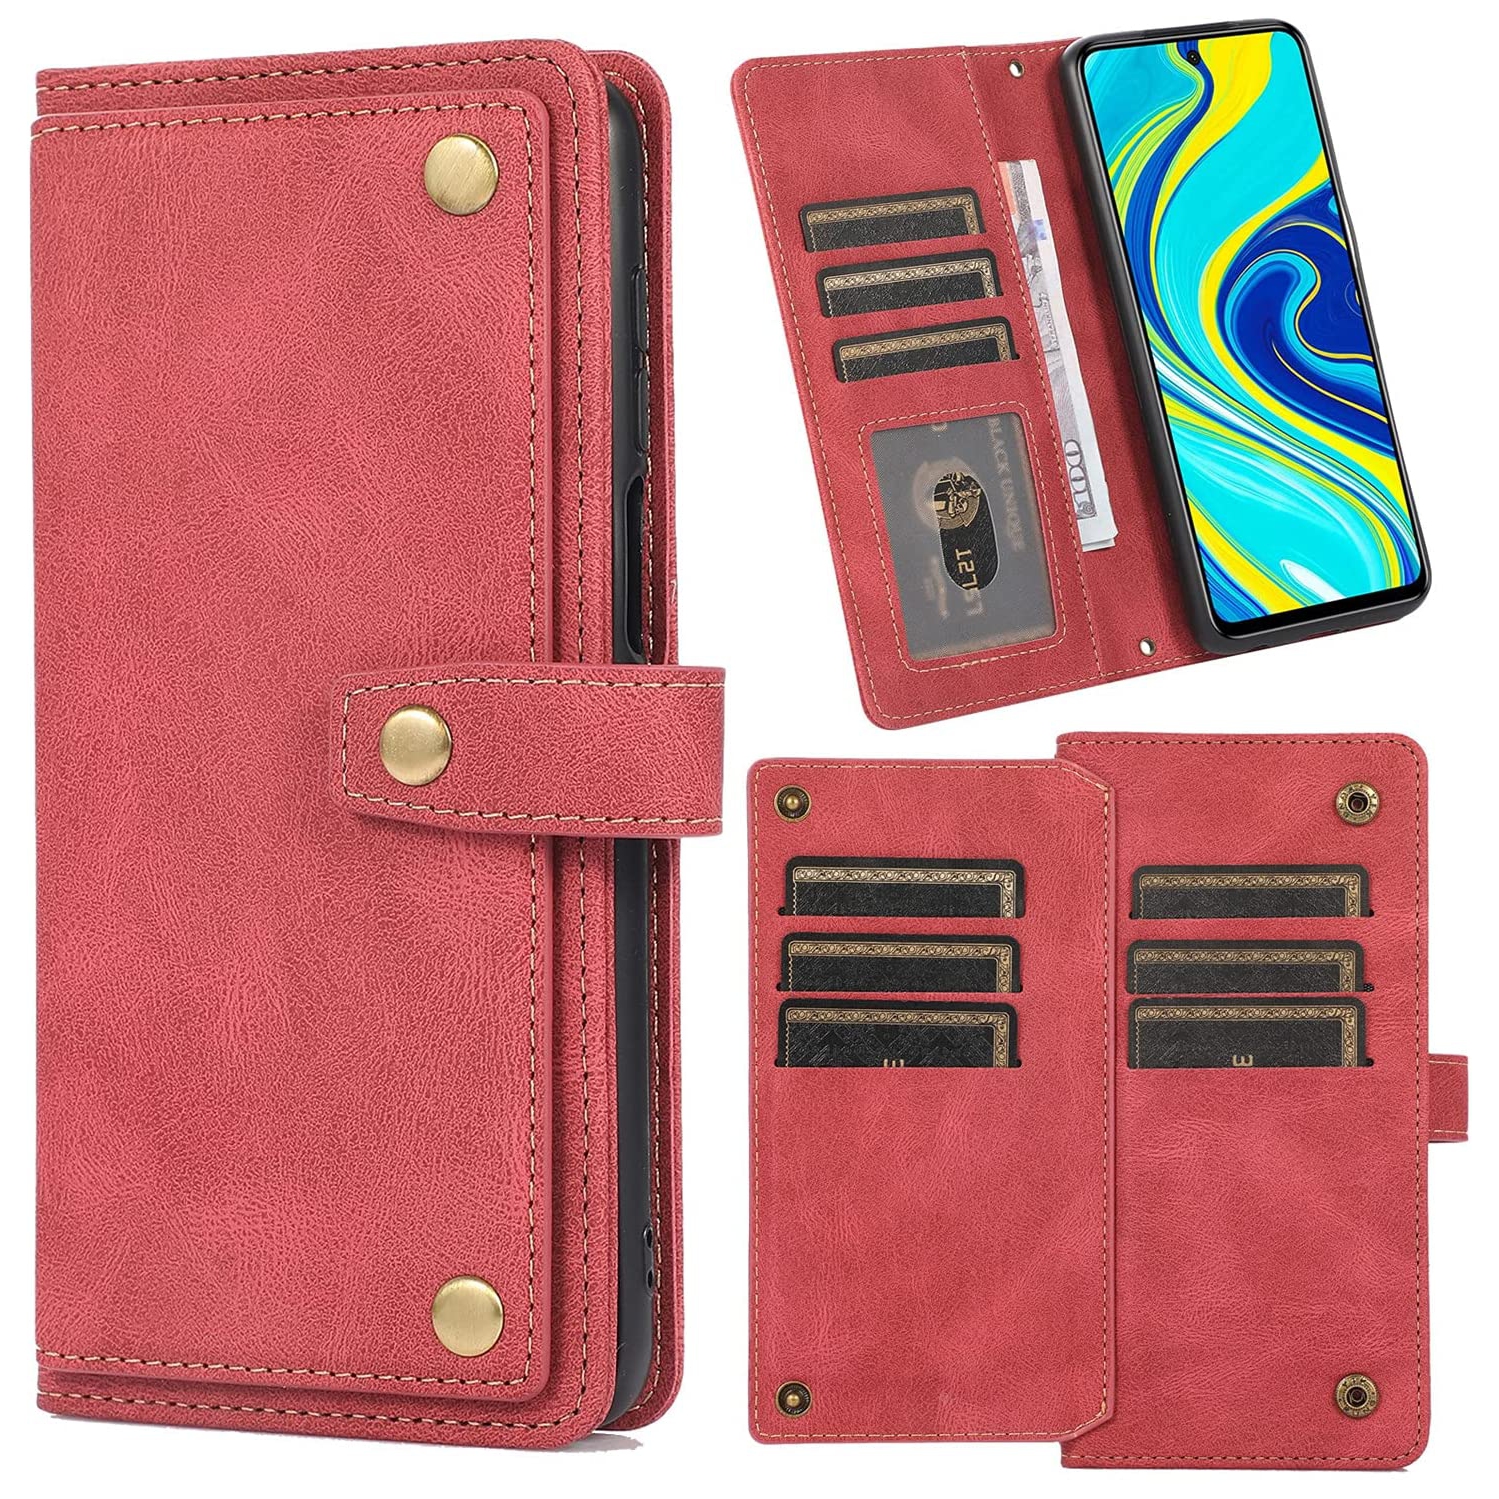 Loris & Case Retro Flip Wallet Case with 9 Card Slots Kickstand PU Leather Folio Wrist Strap Purse Phone Cover for Samsung Galaxy S22 ULTRA -Red (FREE SHIPPING)